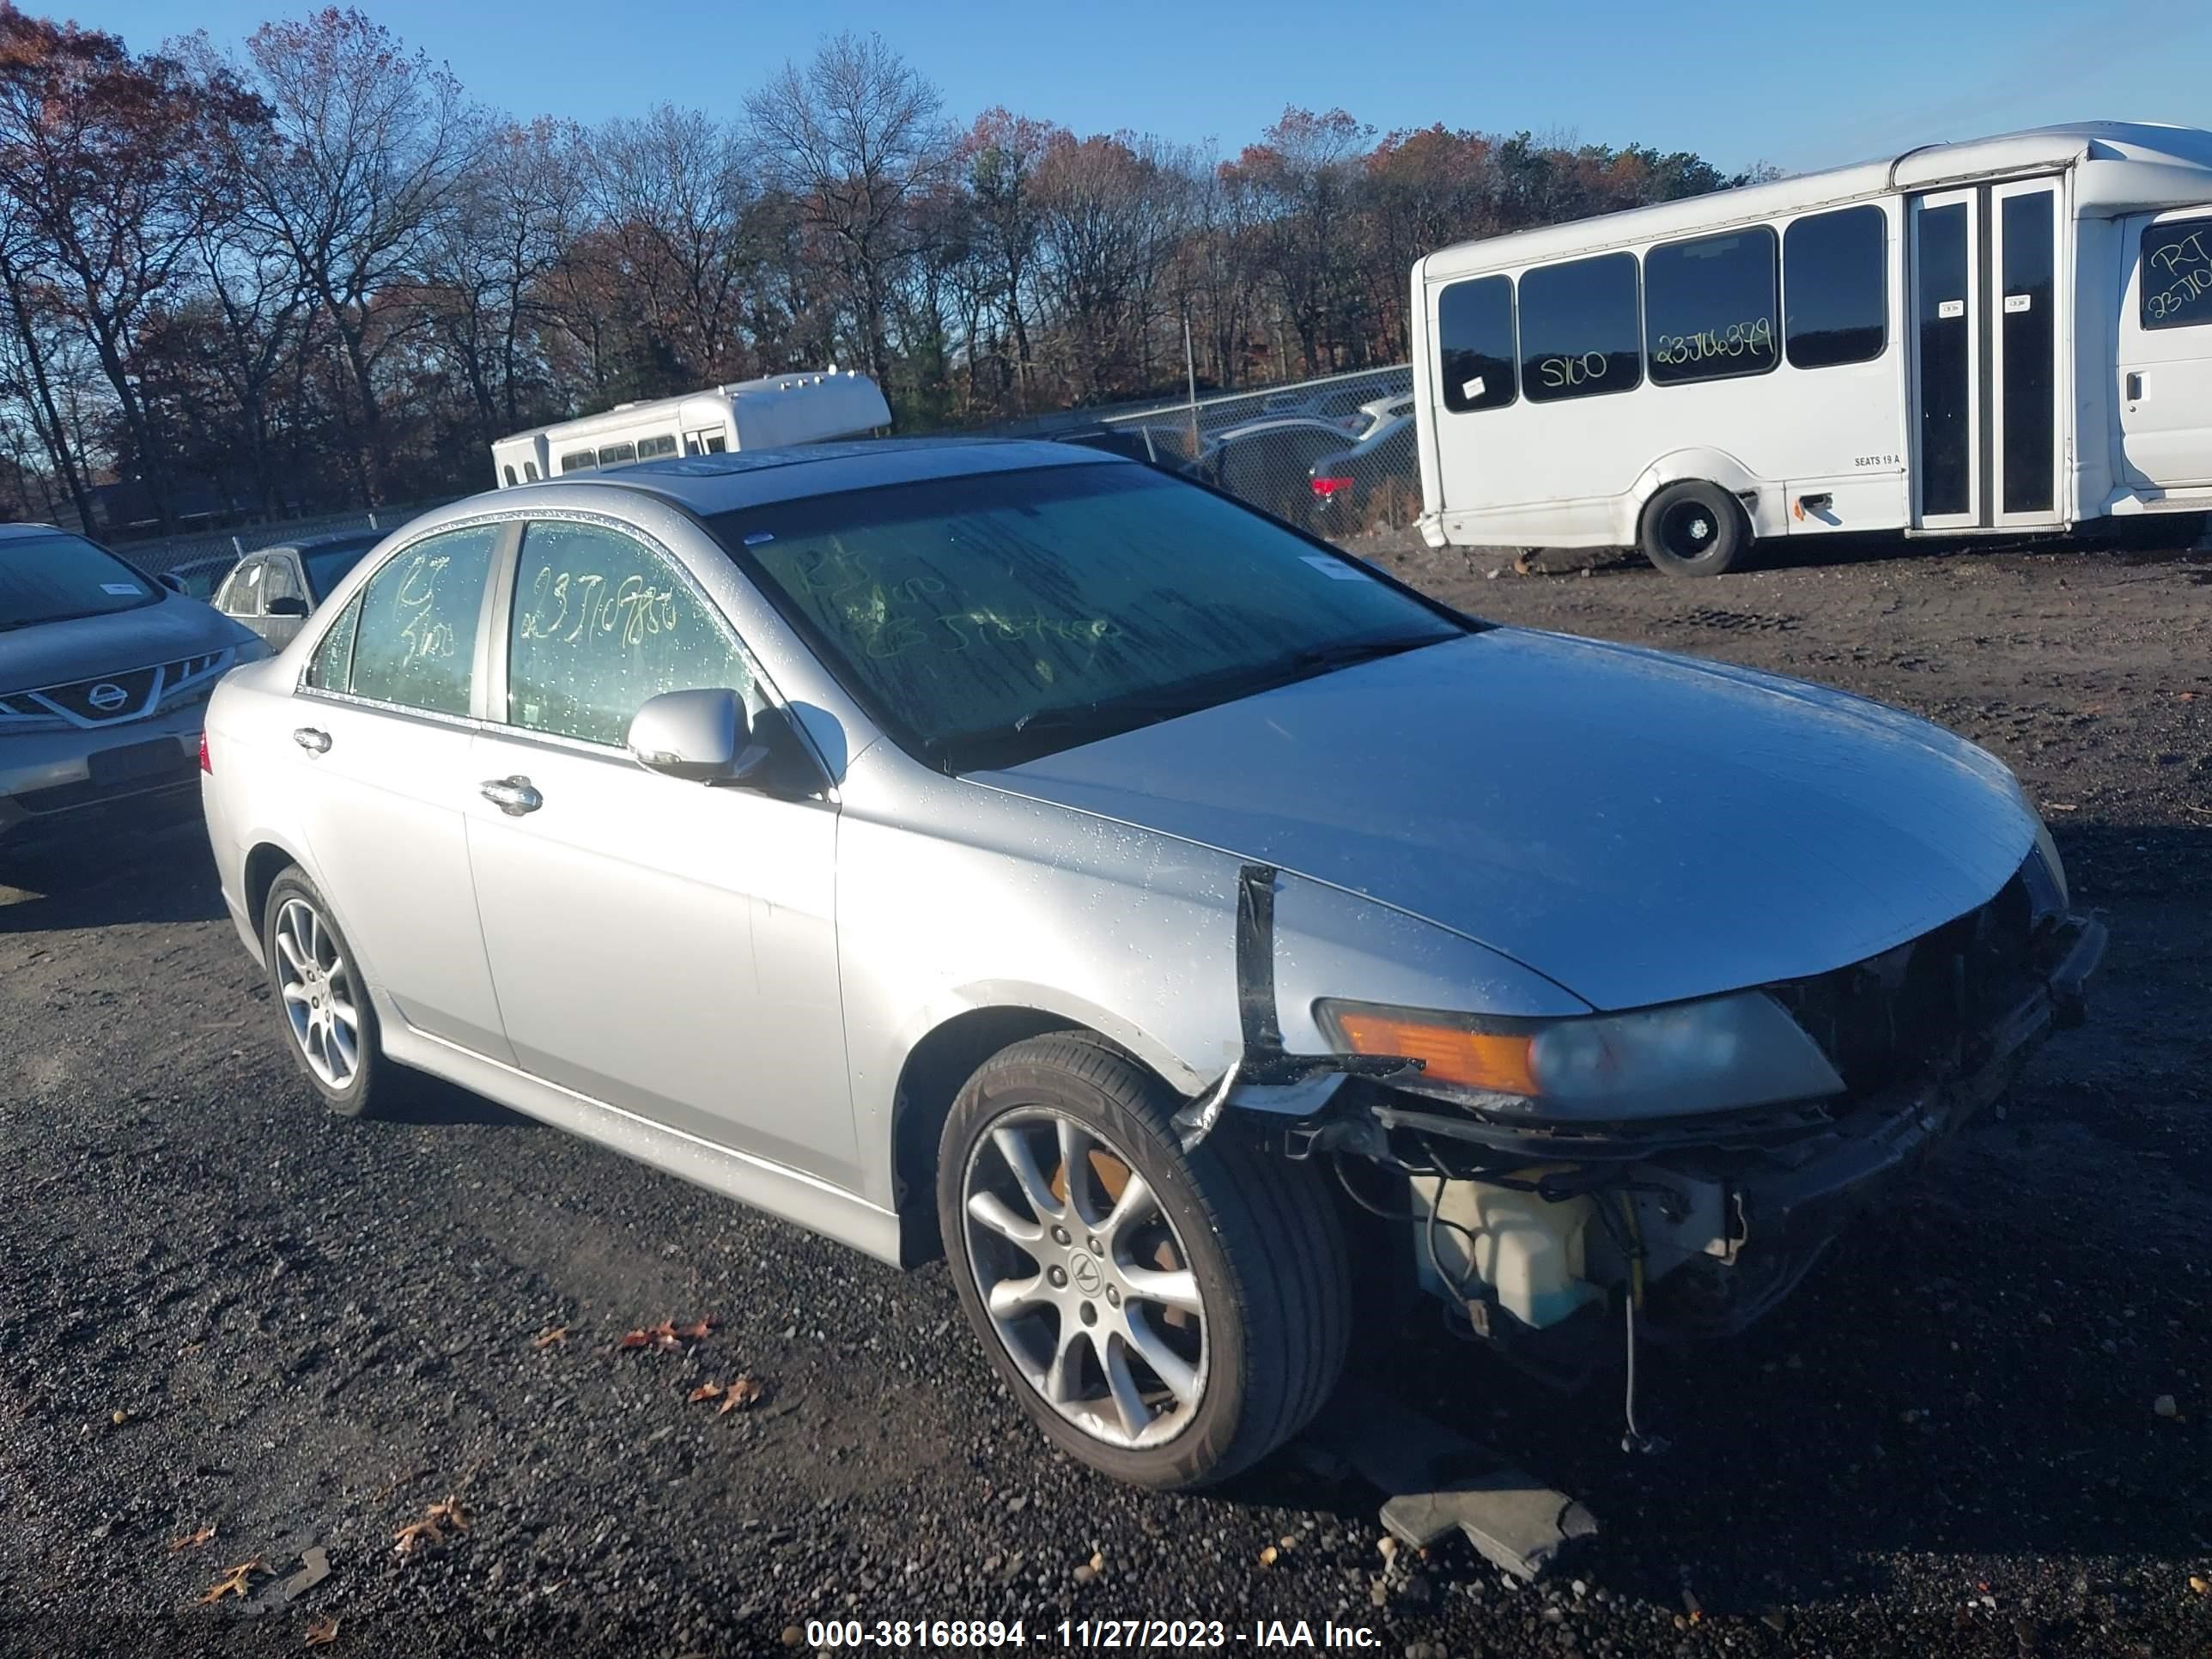 JH4CL96877C012532  - ACURA TSX  2007 IMG - 0